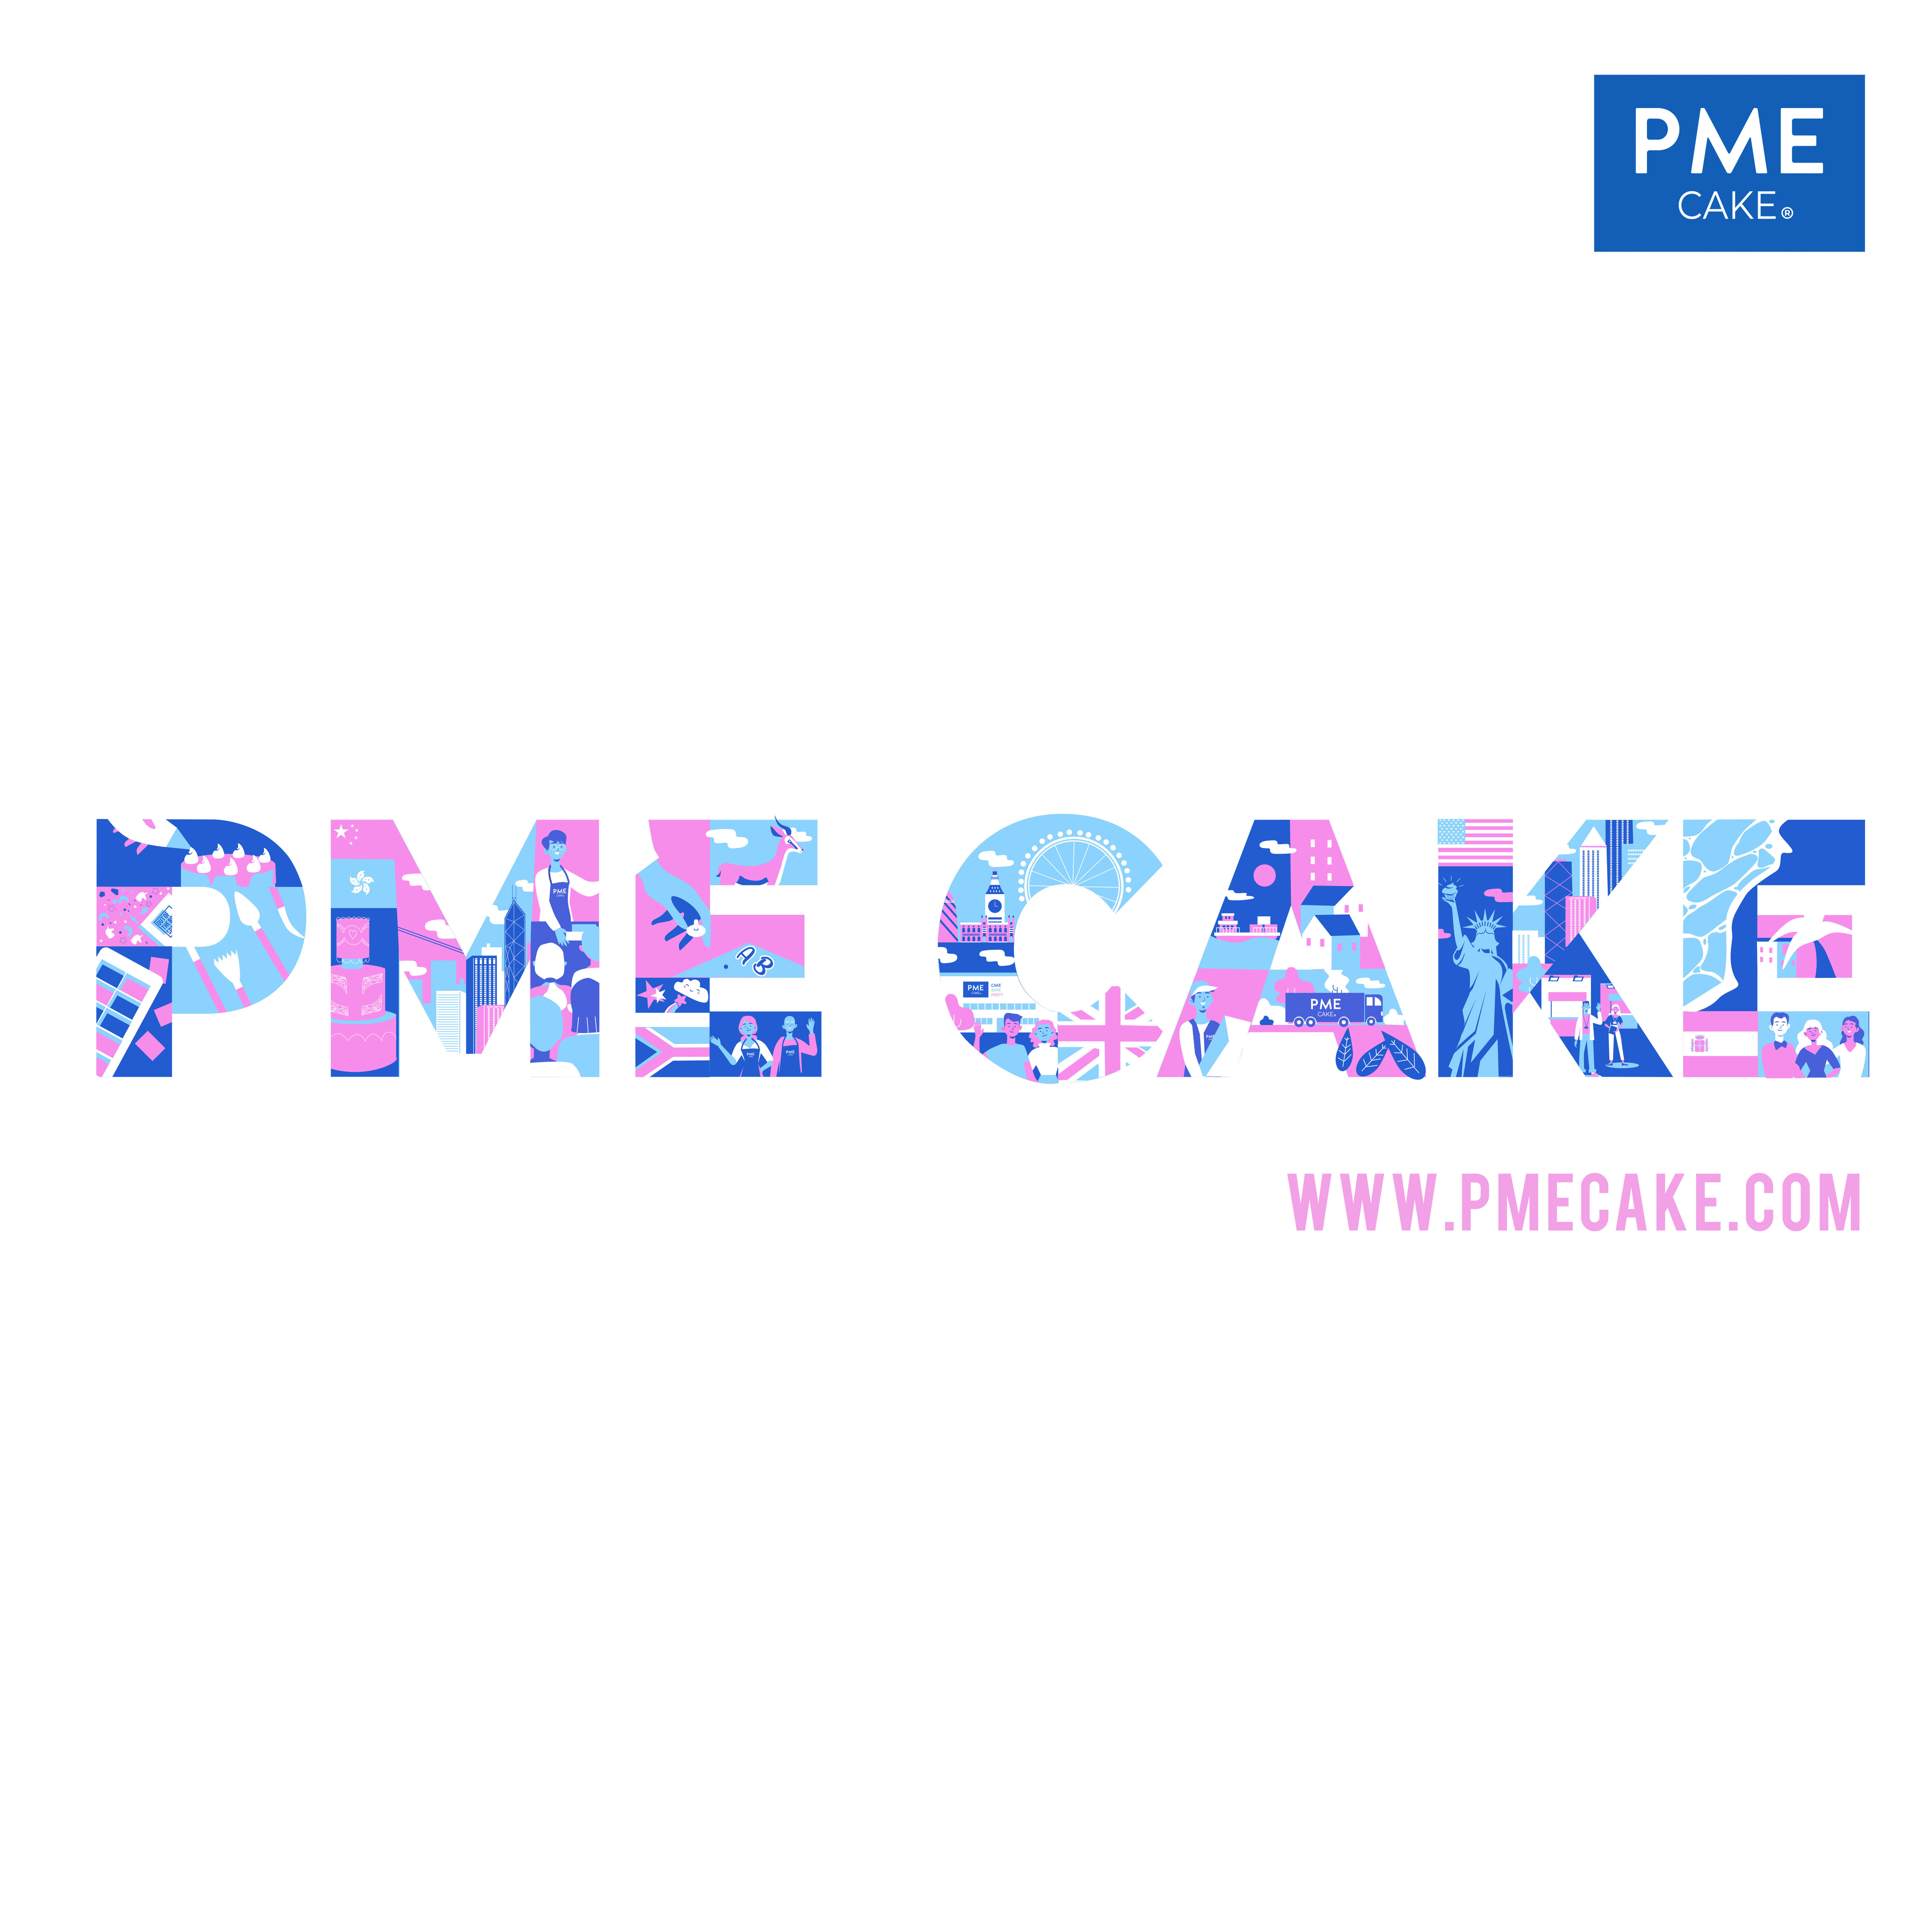 Welcome our newest member PME Cake